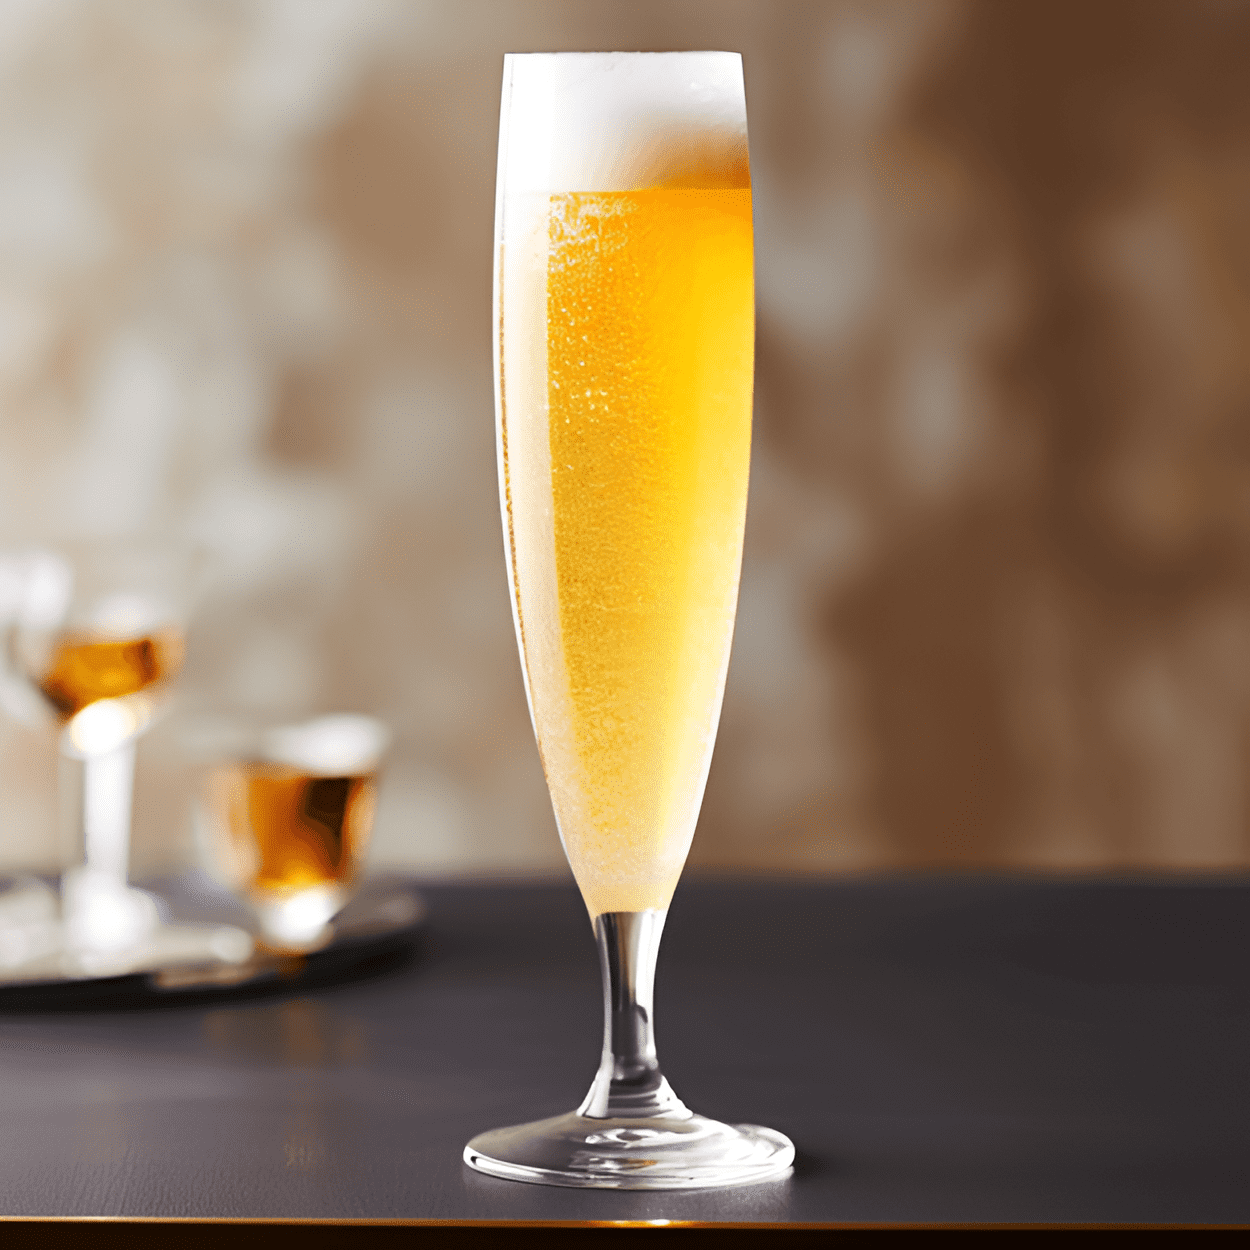 Midnight Kiss Cocktail Recipe - The Midnight Kiss cocktail has a sweet, bubbly taste with a hint of citrus. The champagne gives it a light, effervescent quality, while the orange liqueur adds a subtle tanginess. The sugar rim adds a delightful sweetness to every sip.